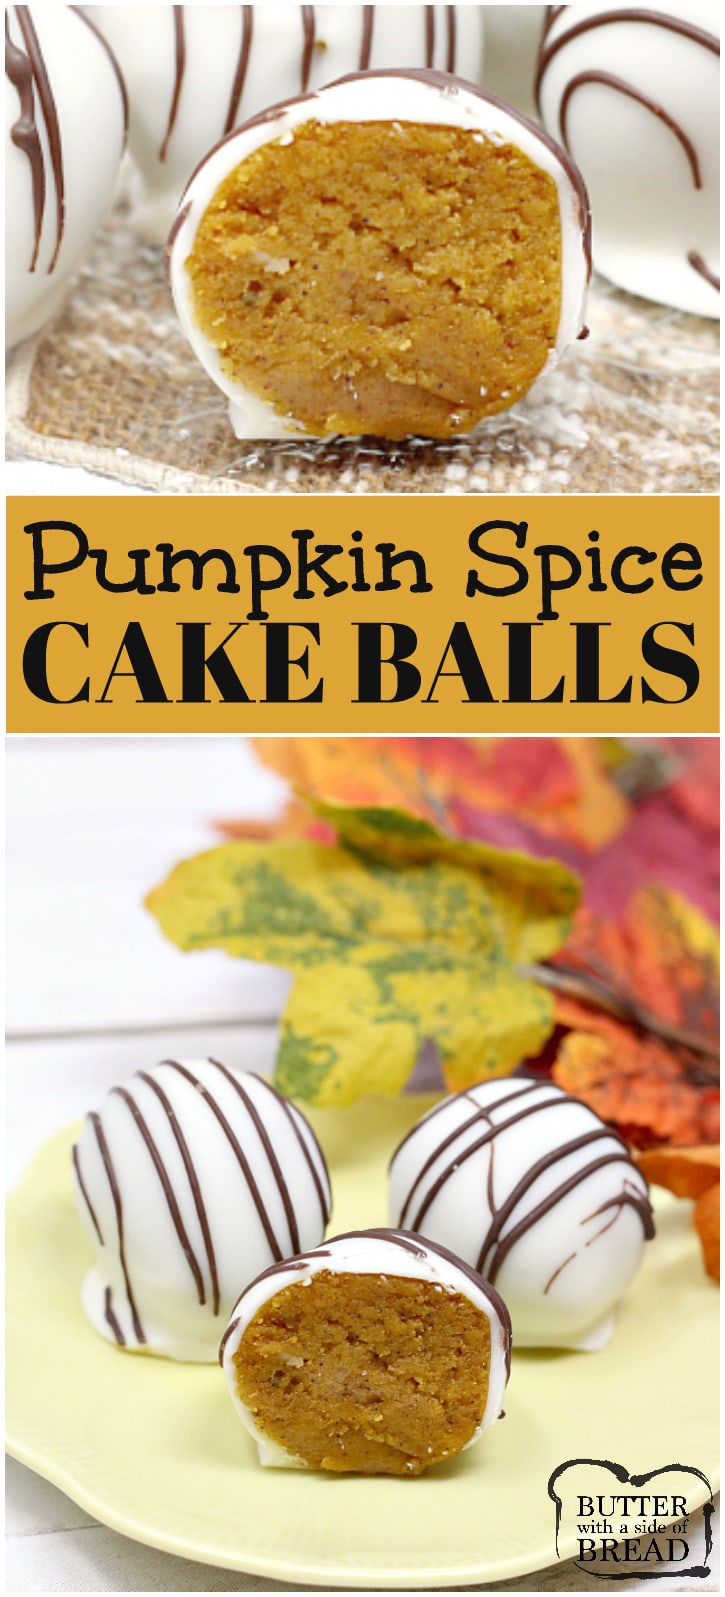 Pumpkin Spice Cake Balls are delicious little bites of pumpkin cake mixed with cream cheese frosting and then coated in white chocolate!